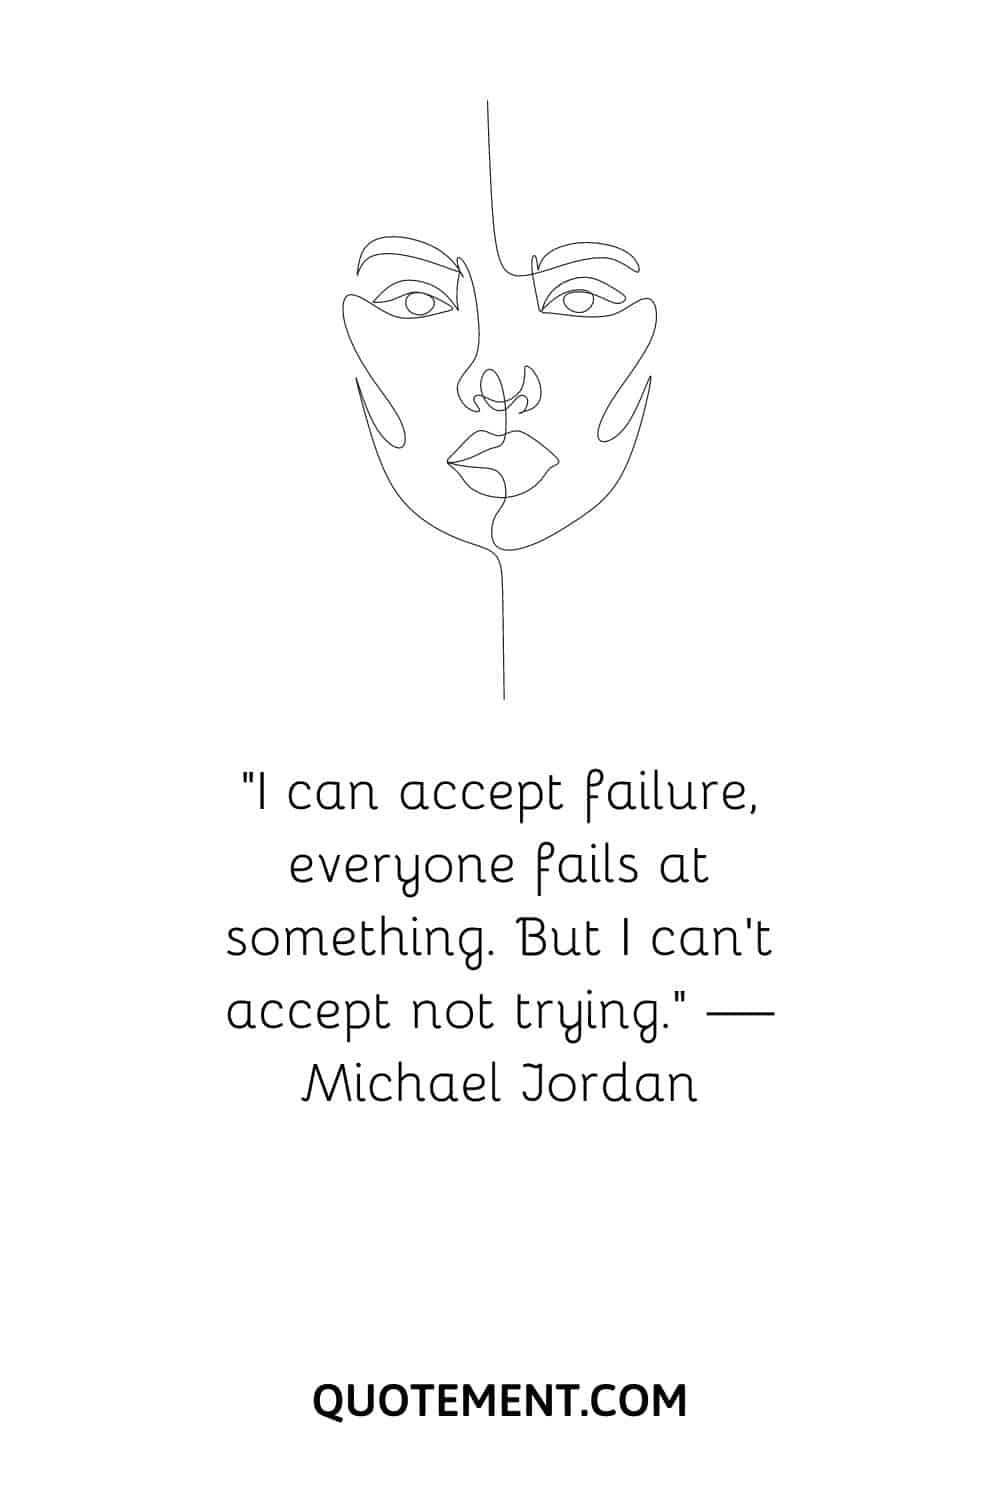 a woman's face illustration representing motivational short acceptance quote